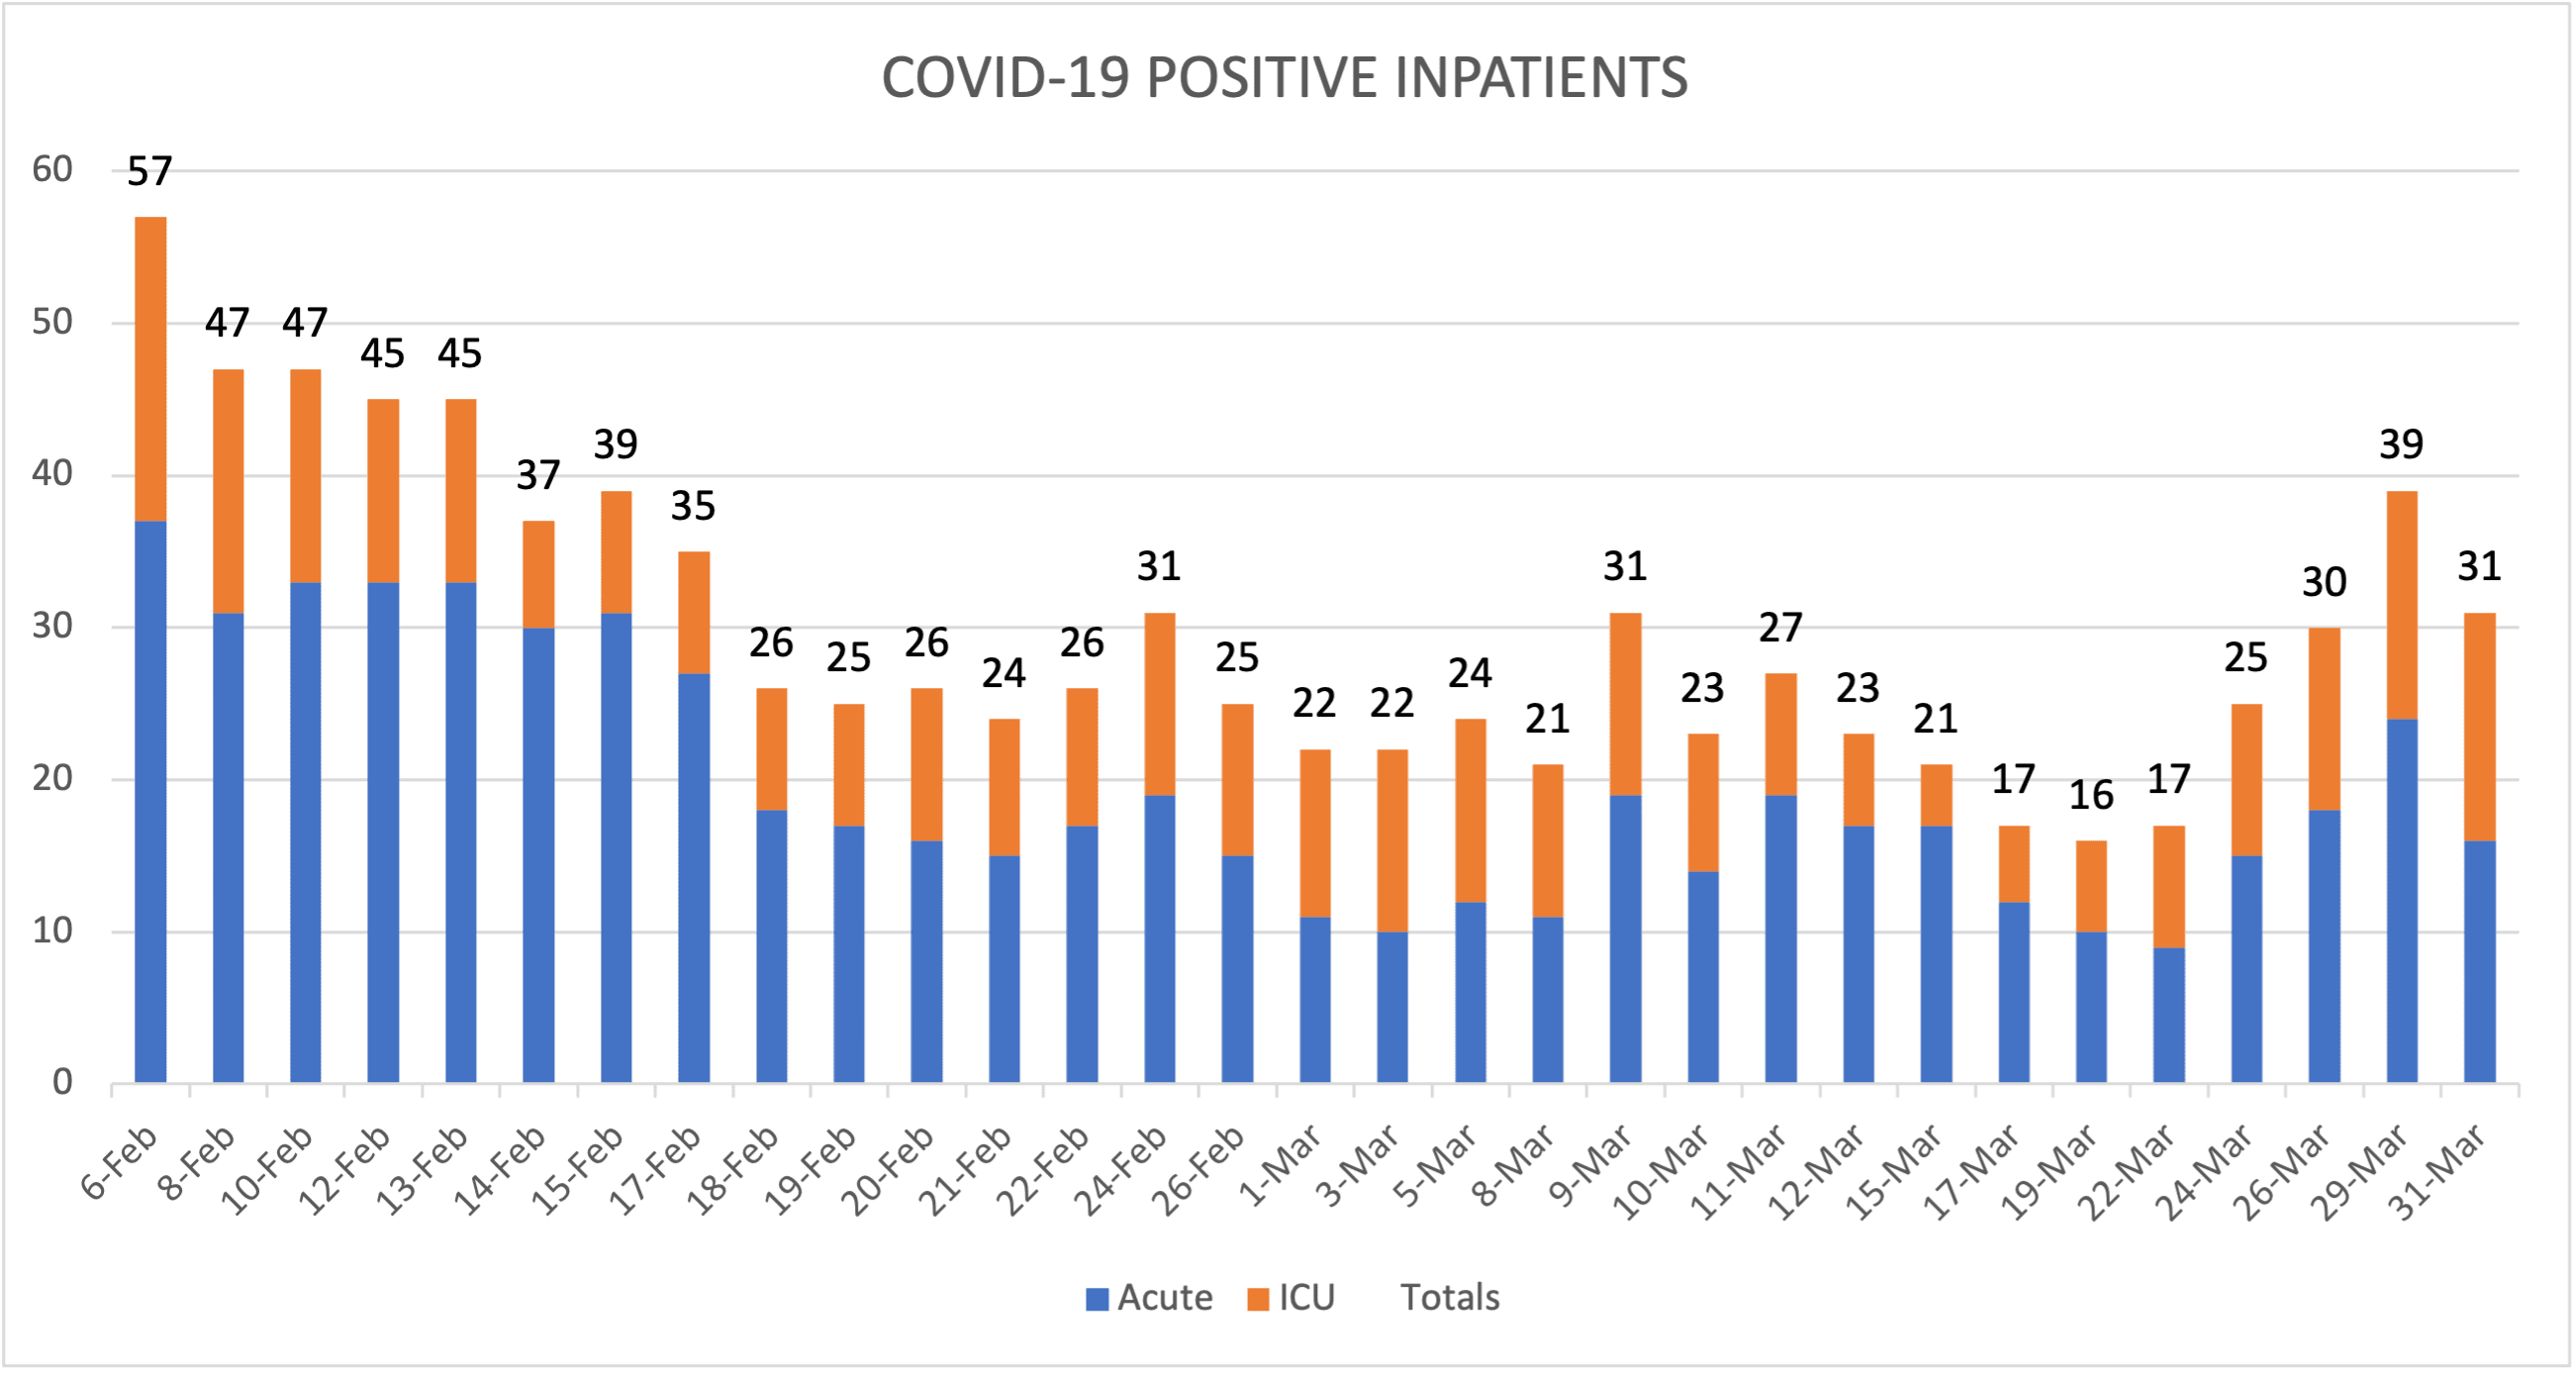 COVID-19 Positive Inpatients March 31 2021